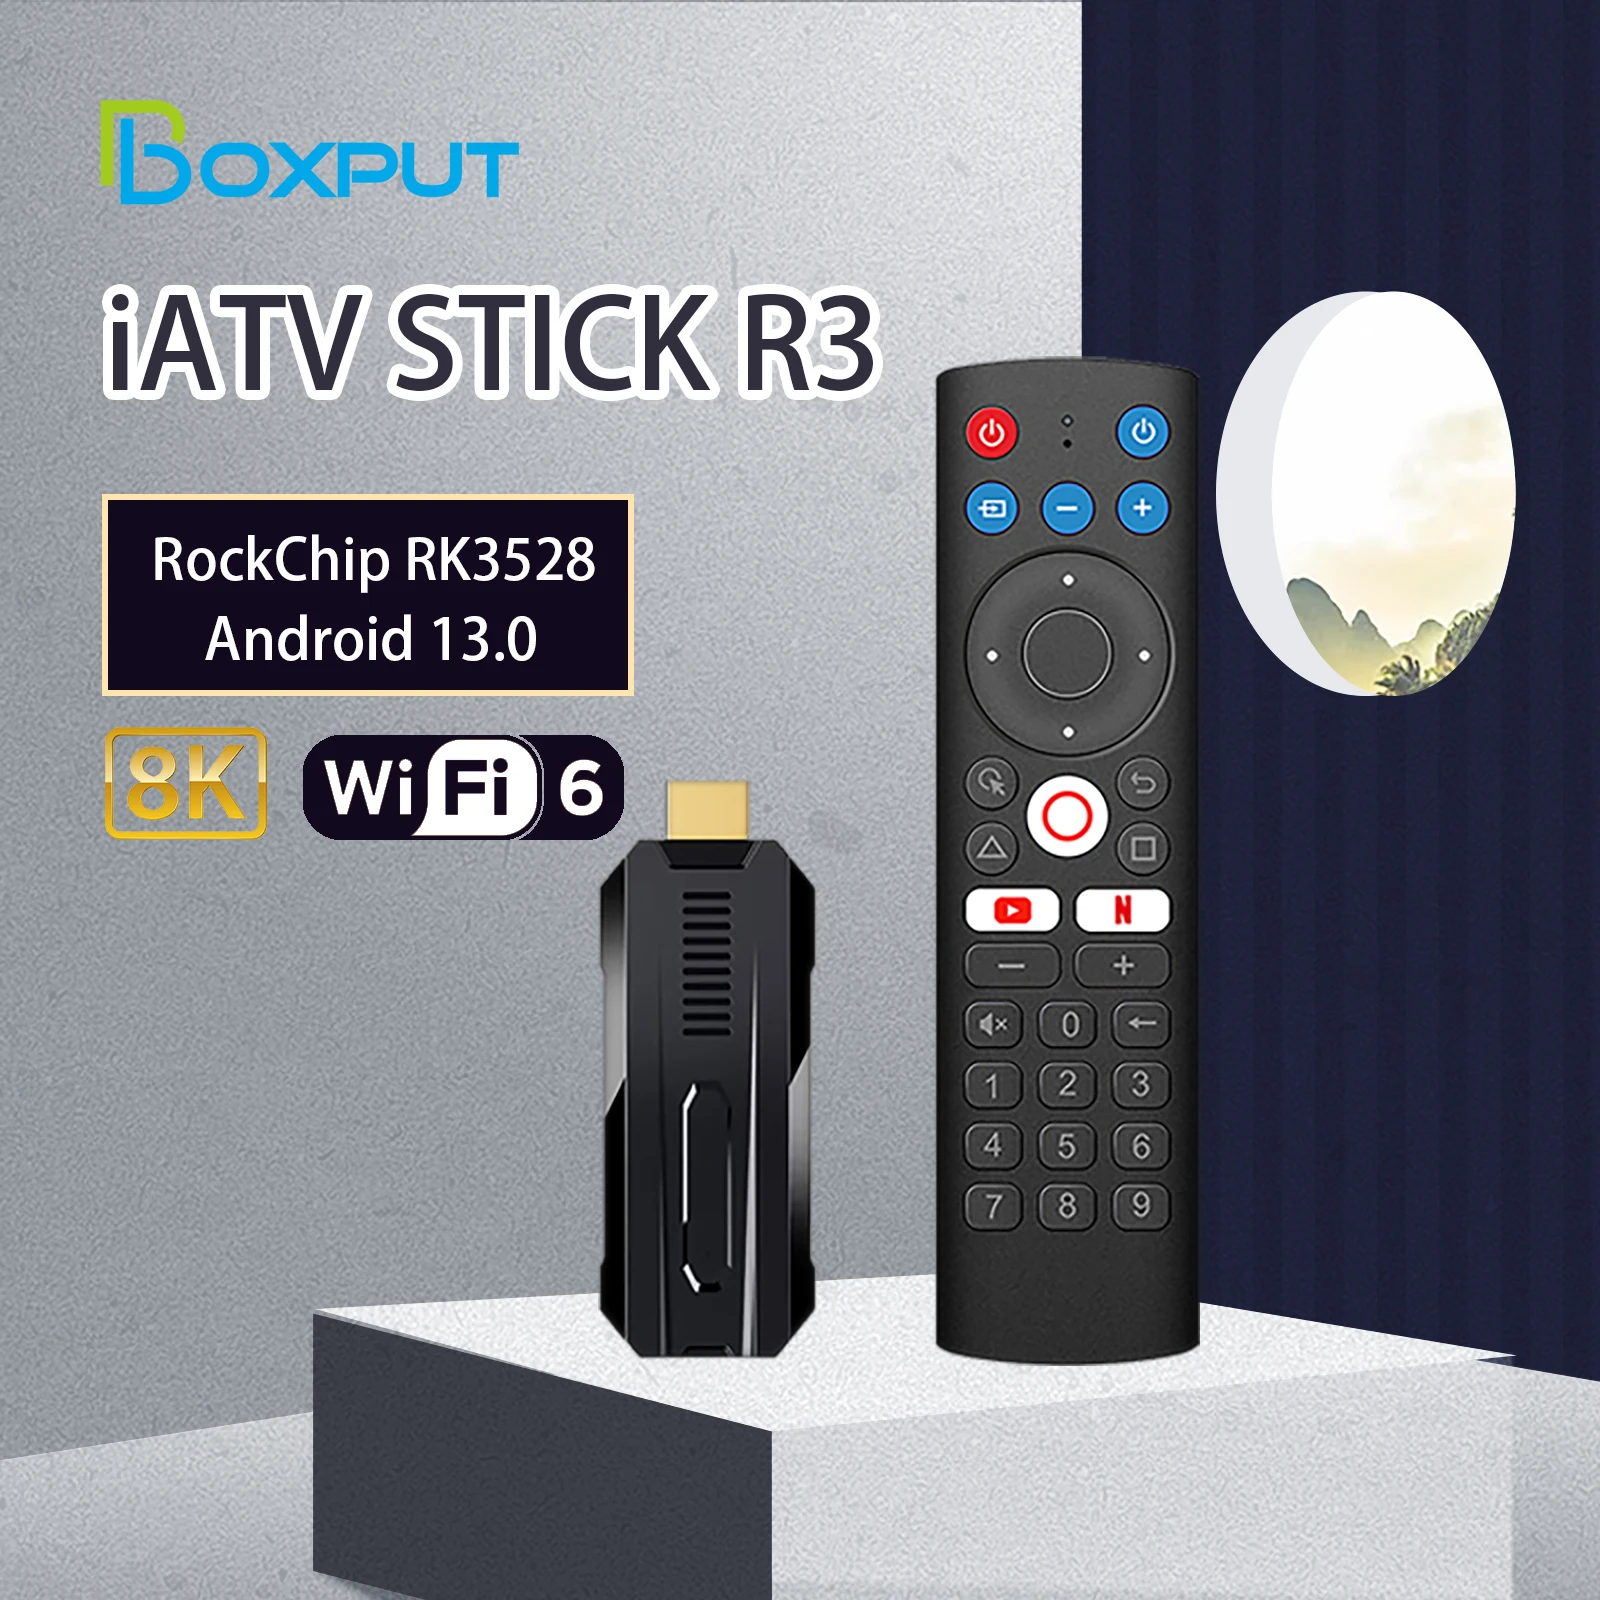 BOXPUT Android 13.0 iATV R3 Fire TV Stick RockChip RK3528 8K Portable TVbox 2.4G/5G WiFi6 BT5.0 OTG TF Slot With Screencasting 360ml volcano fire flame air humidifier aroma diffuser essential oil humidifiers portable smoke ring night lights lamp fragrance